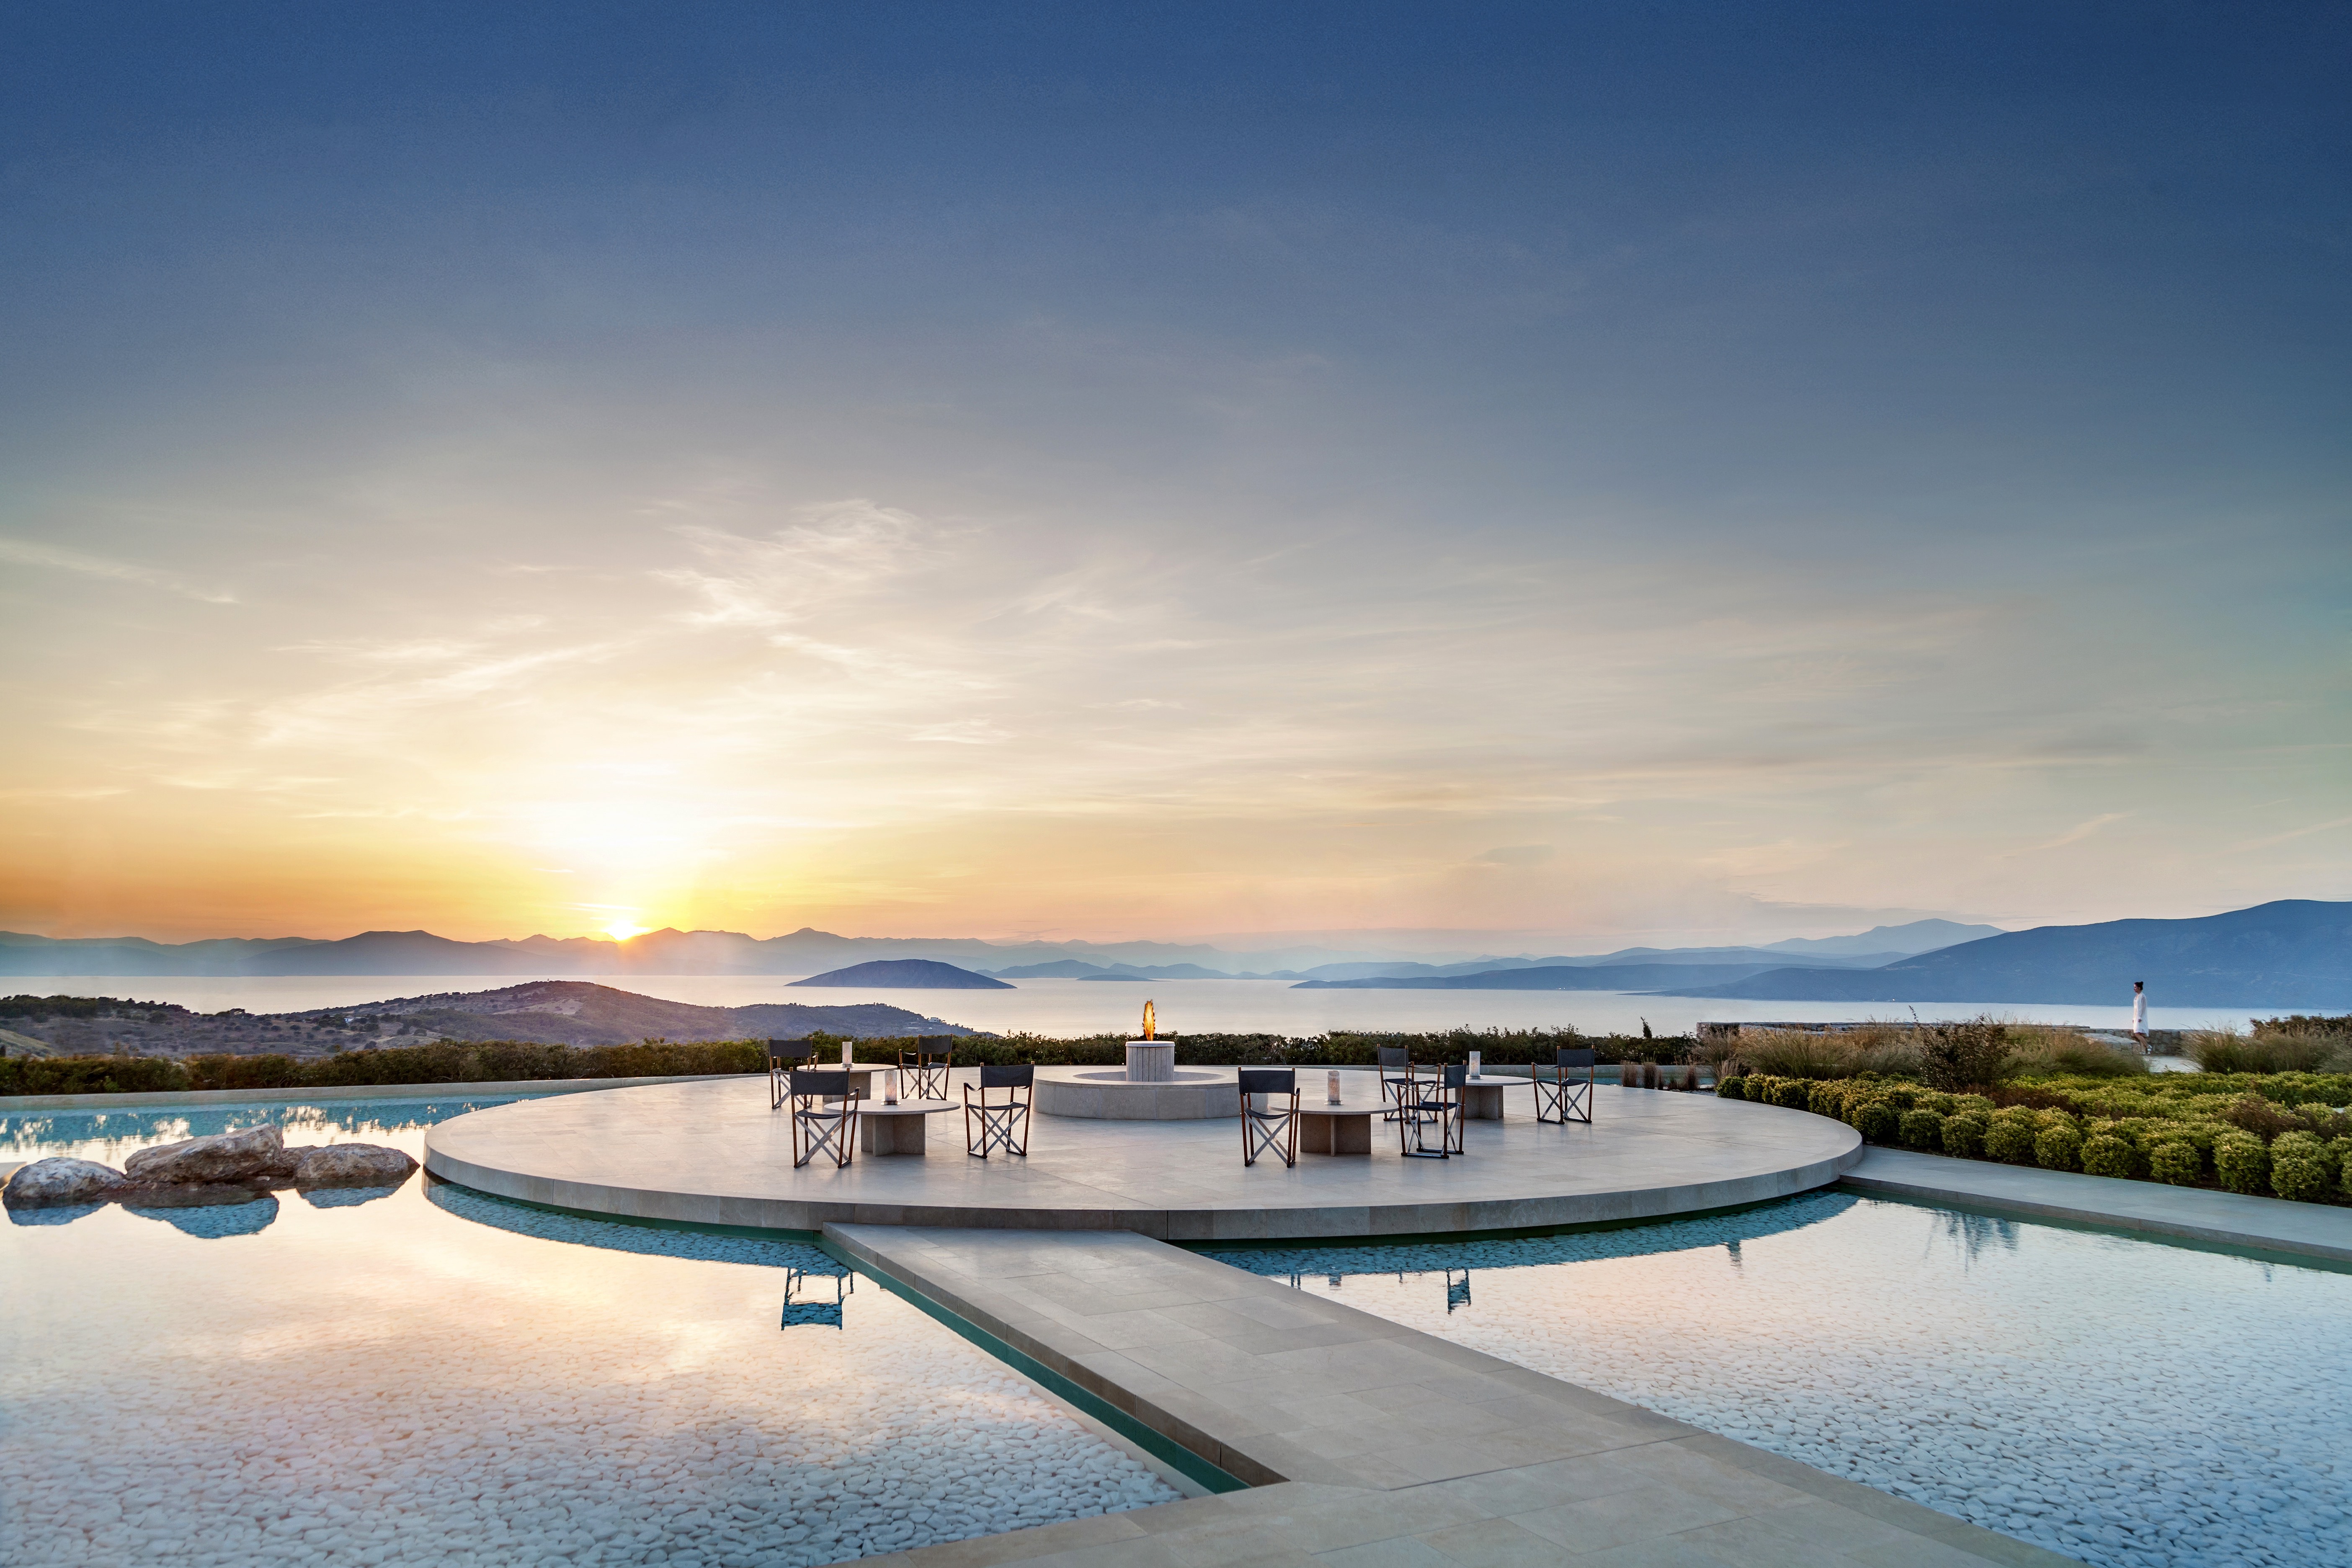 Elegant, Unspoilt, Timeless. Immerse yourself in a world of luxury private villa living within the AmanzoeVillas. On a hilltop above the Aegean, Amanzoe looks over the rugged Peloponnese coast and beyond to the Greek islands of Spetsesand Hydra. Villas are available from €3.2m.